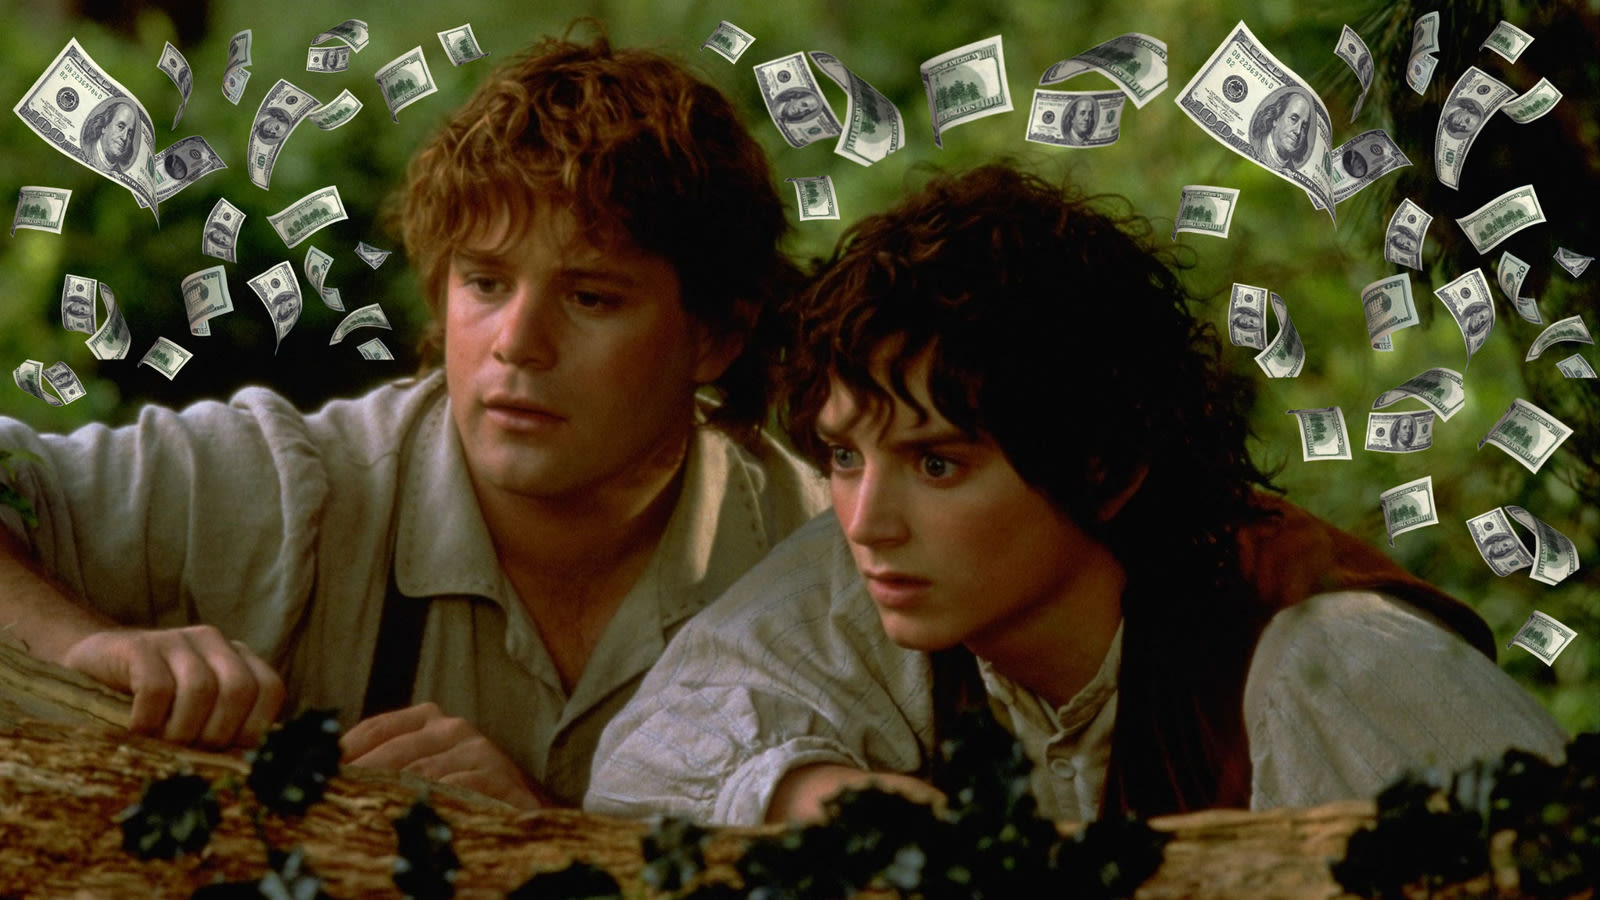 What Year Is It?! Two Lord Of The Rings Movies Just Returned To The Box Office Top 10 - SlashFilm